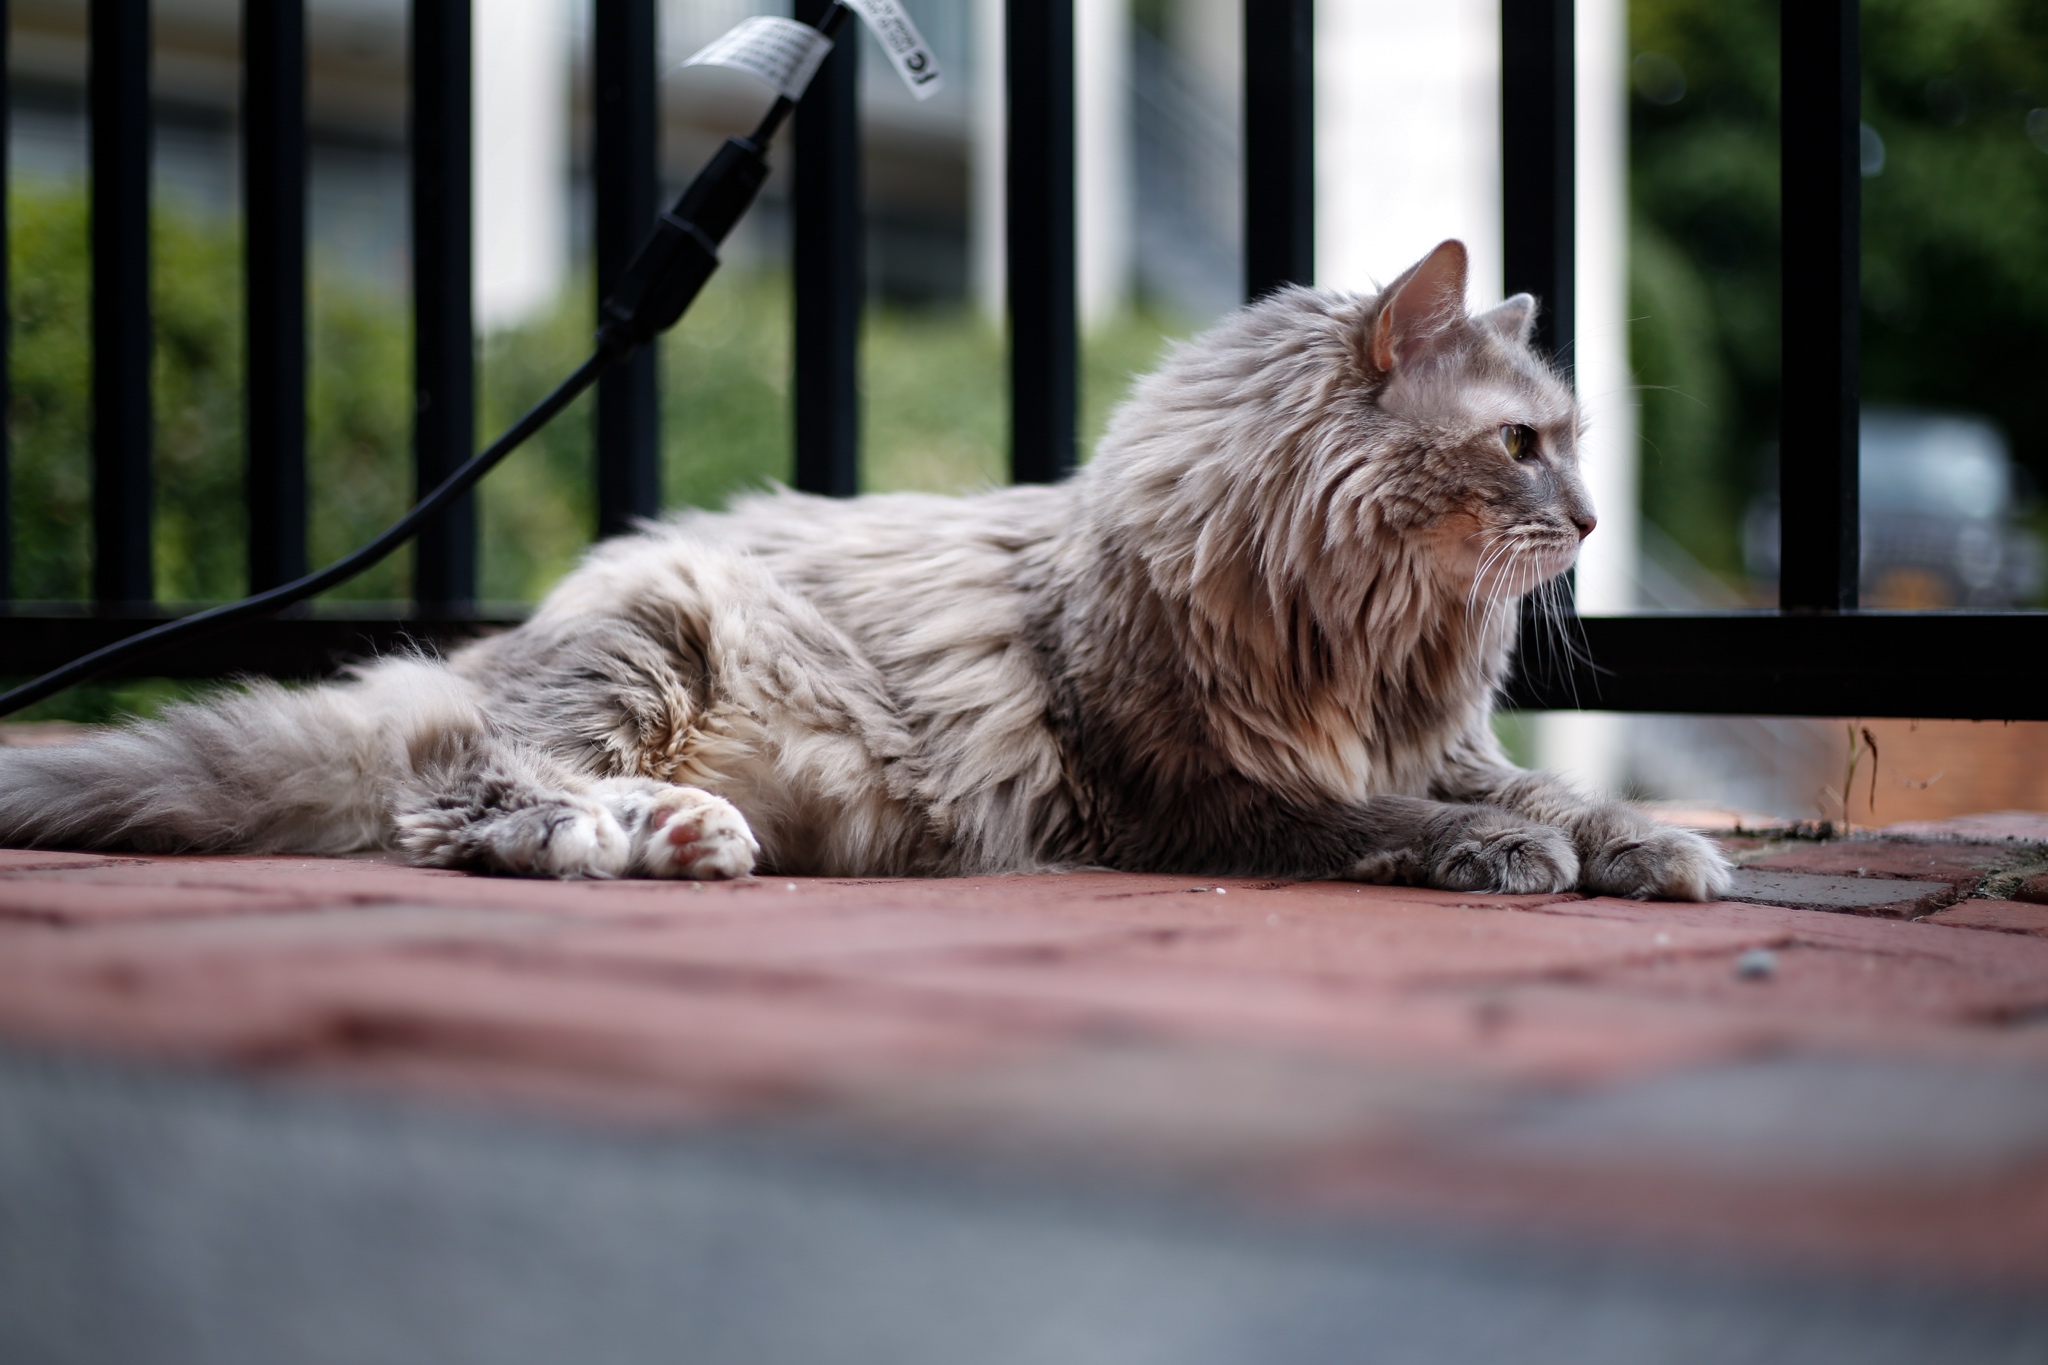 General 2048x1365 photography animals cats